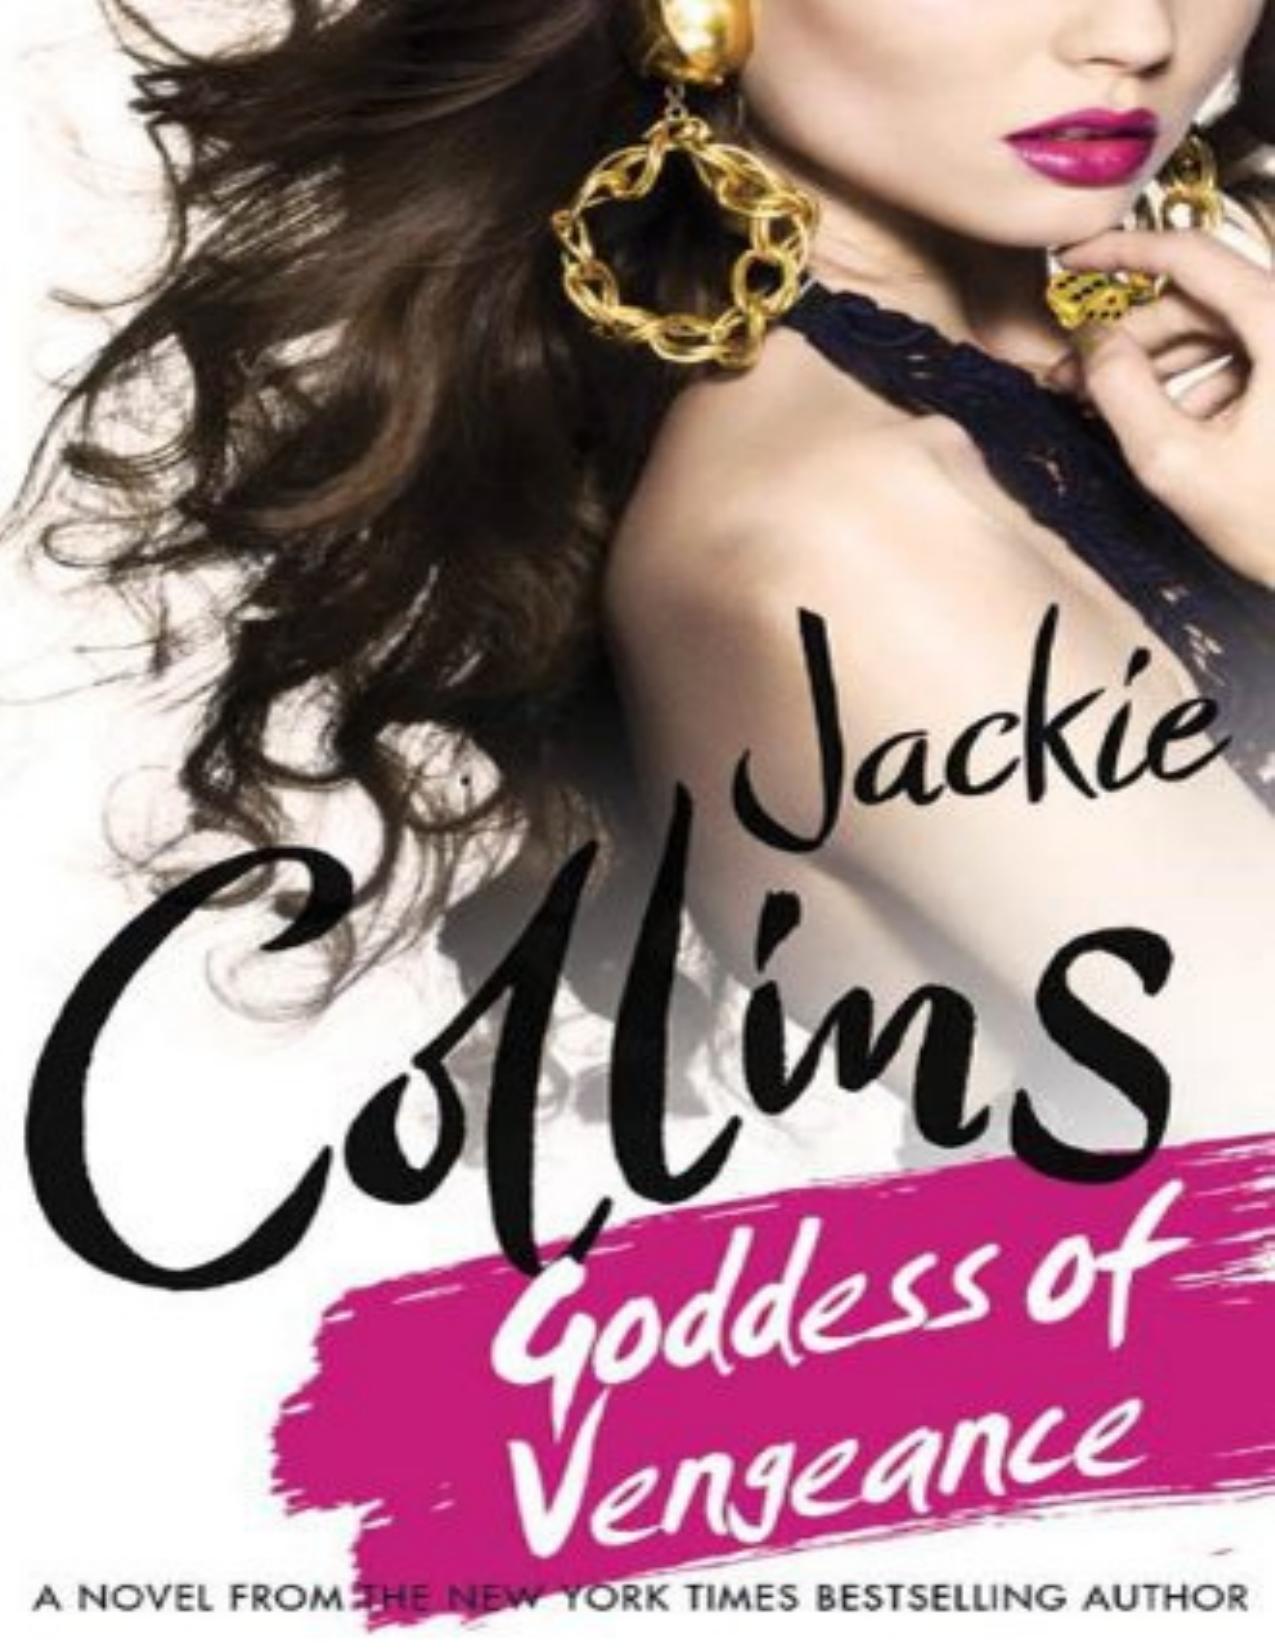 Goddess of Vengeance by Jackie Collins